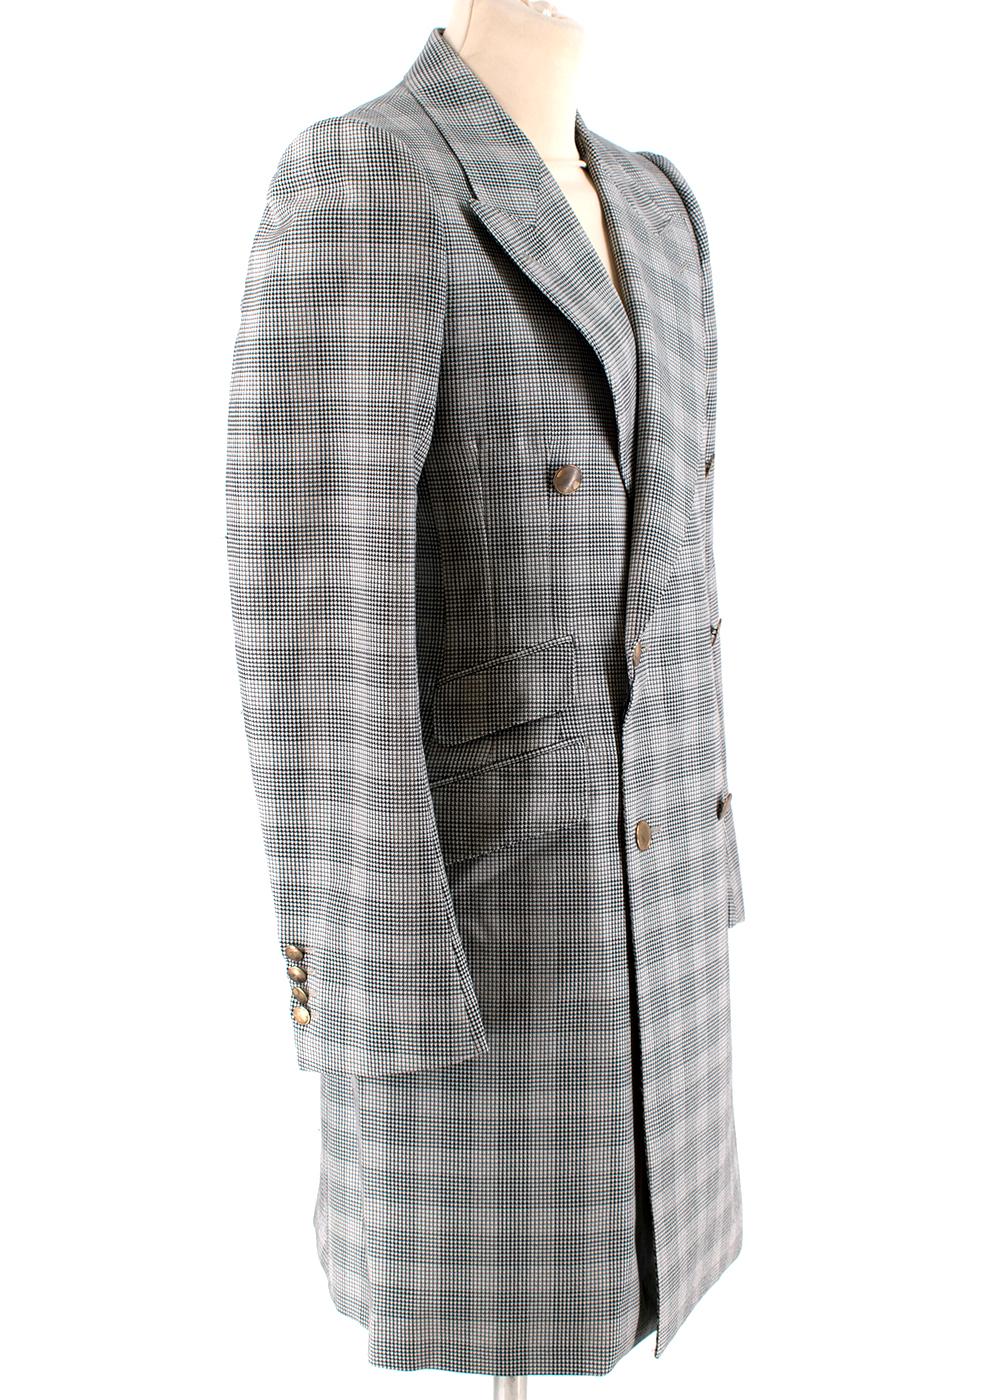 Alexander McQueen Double Breasted Micro Houndstooth Coat

- Three front flap pockets
- Button cuff fastenings
- Houndstooth pattern
- Double-breasted button fastening
- Peak labels

Materials:
Exterior fabric:
- 100% Wool
Lining:
- 100% Rayon